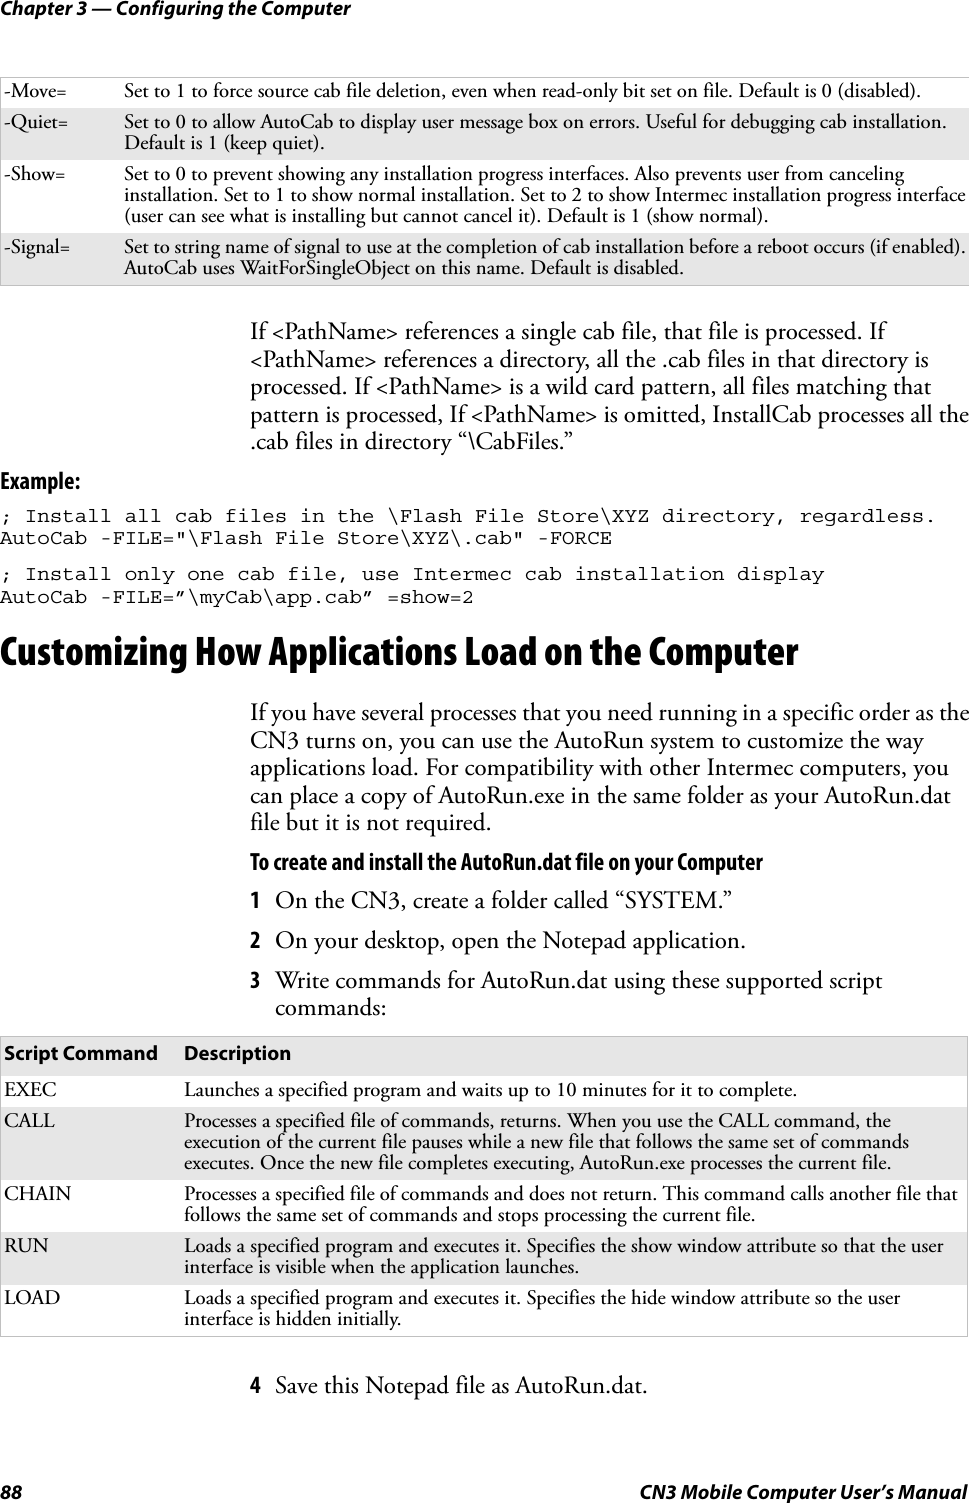 Chapter 3 — Configuring the Computer88 CN3 Mobile Computer User’s ManualIf &lt;PathName&gt; references a single cab file, that file is processed. If &lt;PathName&gt; references a directory, all the .cab files in that directory is processed. If &lt;PathName&gt; is a wild card pattern, all files matching that pattern is processed, If &lt;PathName&gt; is omitted, InstallCab processes all the .cab files in directory “\CabFiles.”Example:; Install all cab files in the \Flash File Store\XYZ directory, regardless.AutoCab -FILE=&quot;\Flash File Store\XYZ\.cab&quot; -FORCE; Install only one cab file, use Intermec cab installation displayAutoCab -FILE=”\myCab\app.cab” =show=2Customizing How Applications Load on the ComputerIf you have several processes that you need running in a specific order as the CN3 turns on, you can use the AutoRun system to customize the way applications load. For compatibility with other Intermec computers, you can place a copy of AutoRun.exe in the same folder as your AutoRun.dat file but it is not required.To create and install the AutoRun.dat file on your Computer1On the CN3, create a folder called “SYSTEM.”2On your desktop, open the Notepad application.3Write commands for AutoRun.dat using these supported script commands:4Save this Notepad file as AutoRun.dat.-Move= Set to 1 to force source cab file deletion, even when read-only bit set on file. Default is 0 (disabled).-Quiet= Set to 0 to allow AutoCab to display user message box on errors. Useful for debugging cab installation. Default is 1 (keep quiet).-Show= Set to 0 to prevent showing any installation progress interfaces. Also prevents user from canceling installation. Set to 1 to show normal installation. Set to 2 to show Intermec installation progress interface (user can see what is installing but cannot cancel it). Default is 1 (show normal).-Signal= Set to string name of signal to use at the completion of cab installation before a reboot occurs (if enabled). AutoCab uses WaitForSingleObject on this name. Default is disabled.Script Command DescriptionEXEC Launches a specified program and waits up to 10 minutes for it to complete.CALL Processes a specified file of commands, returns. When you use the CALL command, the execution of the current file pauses while a new file that follows the same set of commands executes. Once the new file completes executing, AutoRun.exe processes the current file.CHAIN Processes a specified file of commands and does not return. This command calls another file that follows the same set of commands and stops processing the current file.RUN Loads a specified program and executes it. Specifies the show window attribute so that the user interface is visible when the application launches.LOAD Loads a specified program and executes it. Specifies the hide window attribute so the user interface is hidden initially.